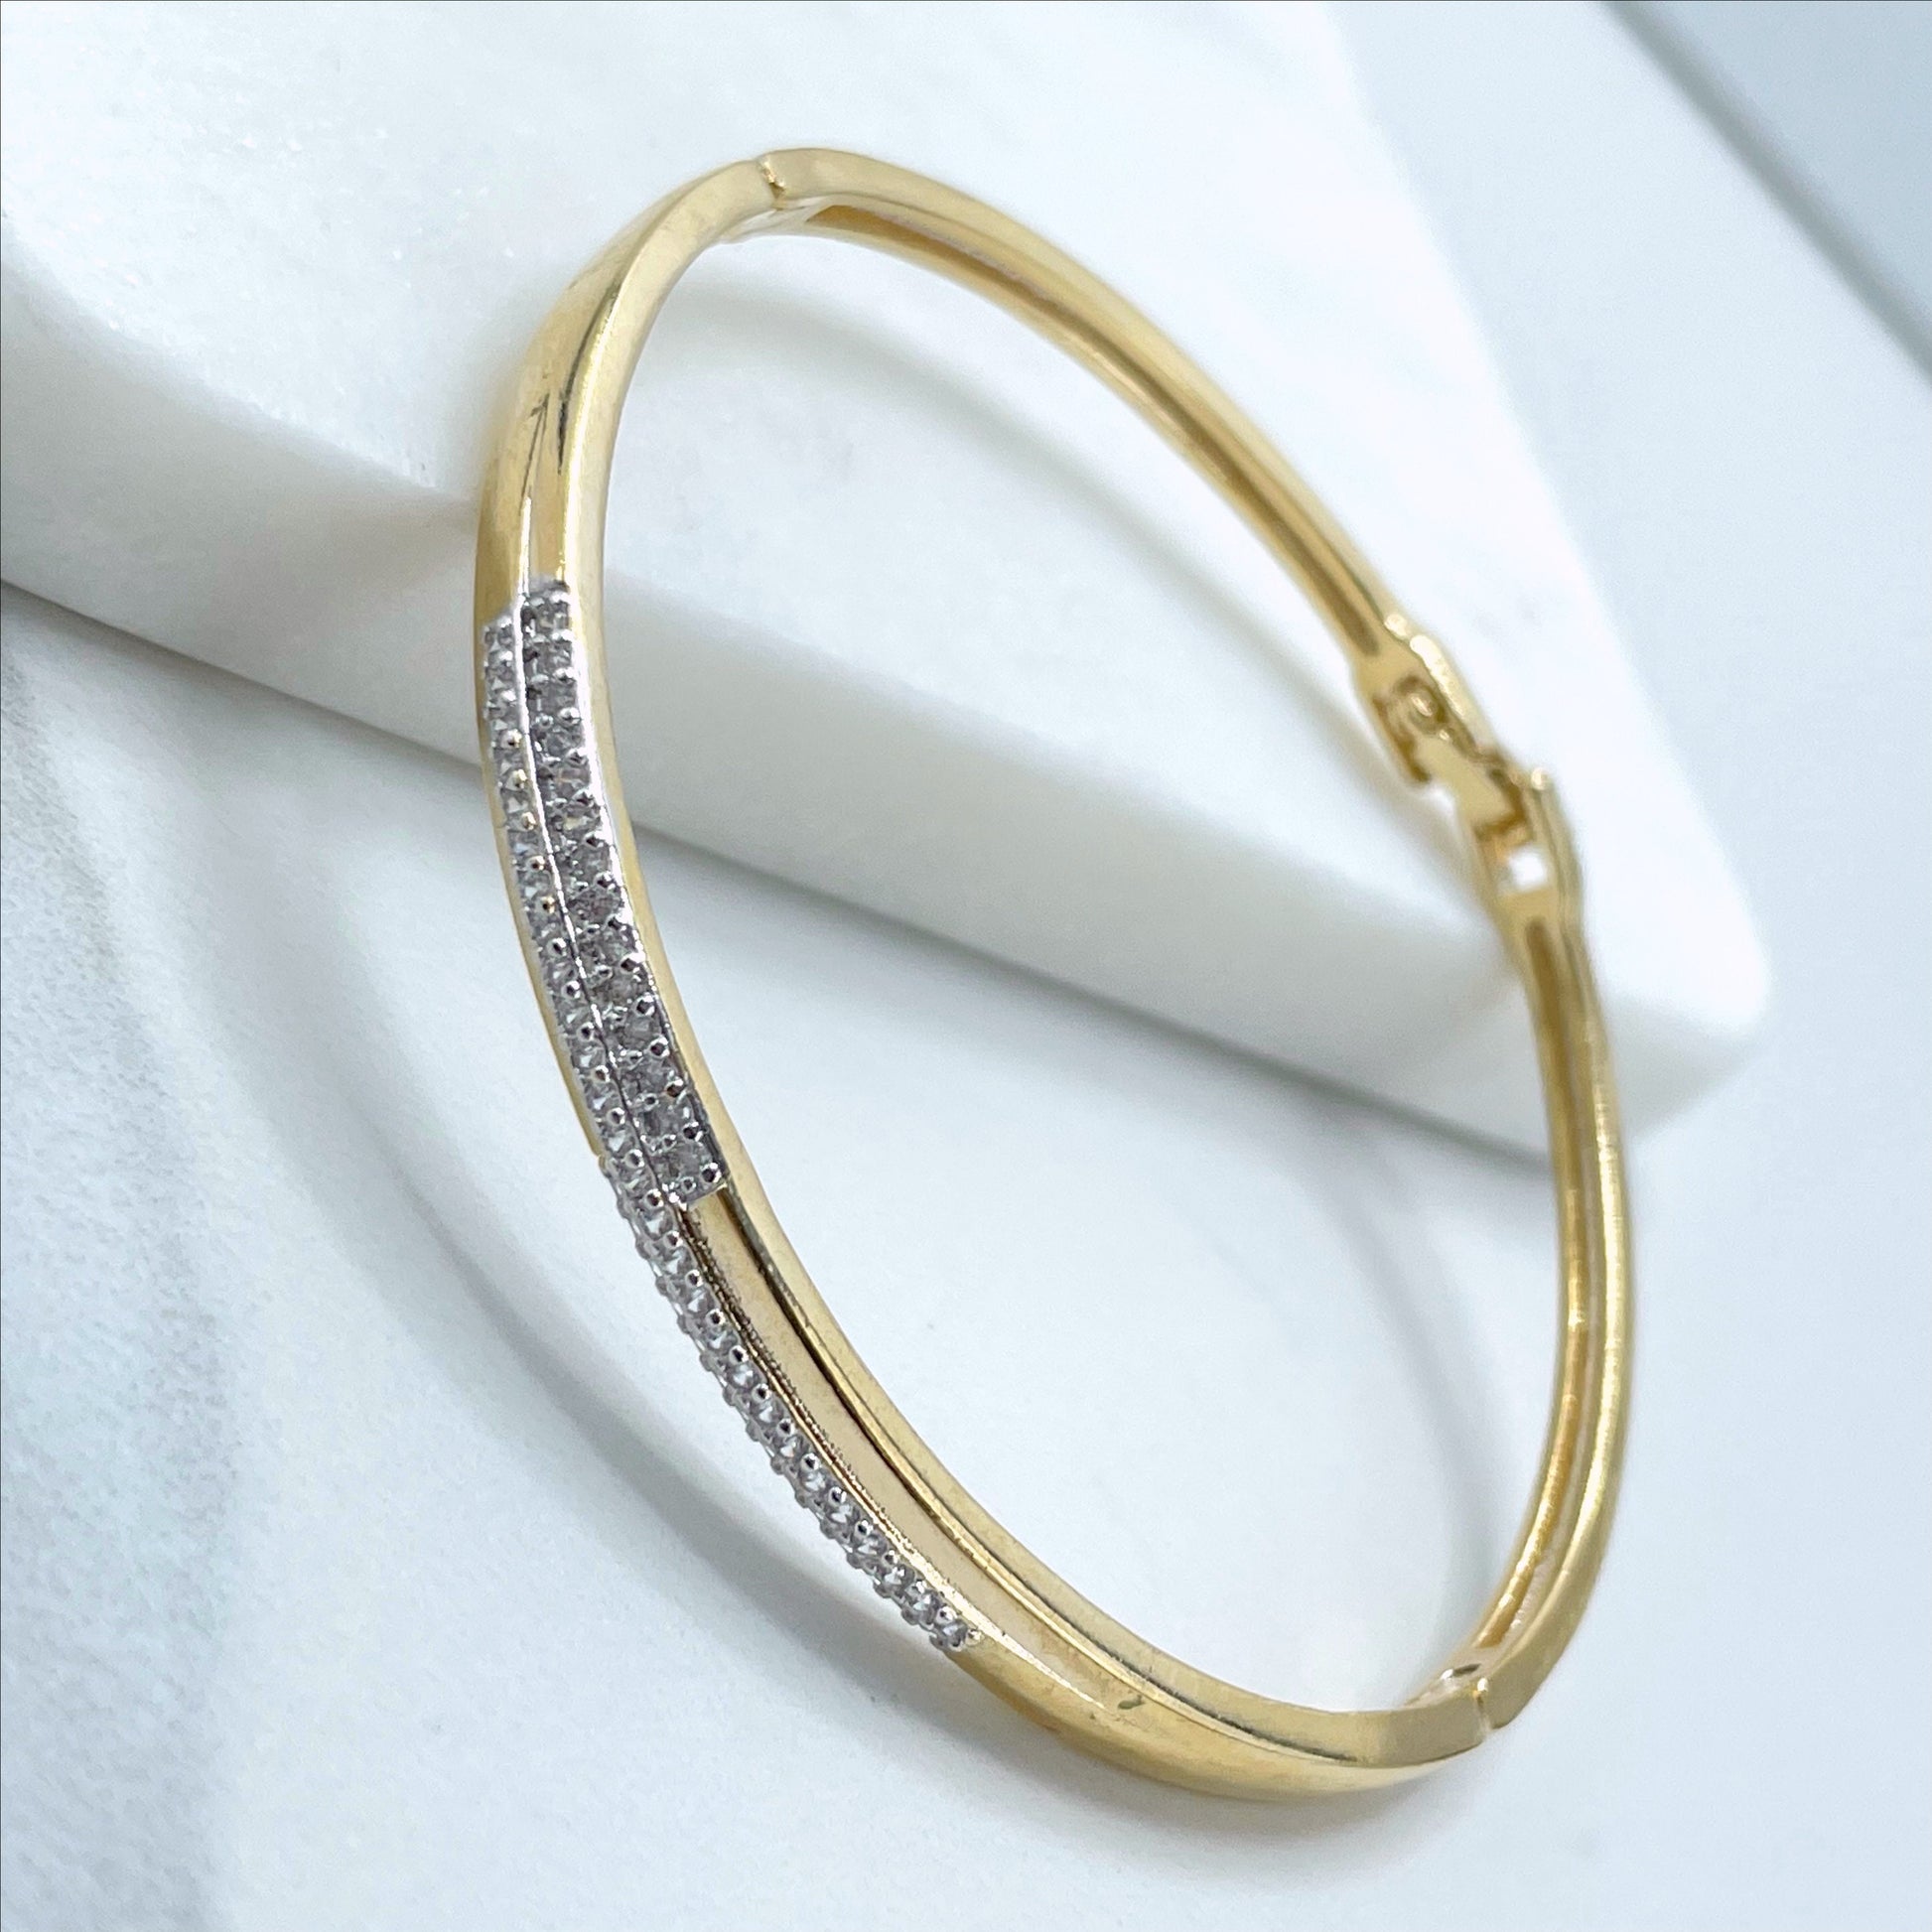 18k Gold Filled and Silver Filled with Cubic Zirconia Bangle Bracelet Wholesale Jewelry Supplies